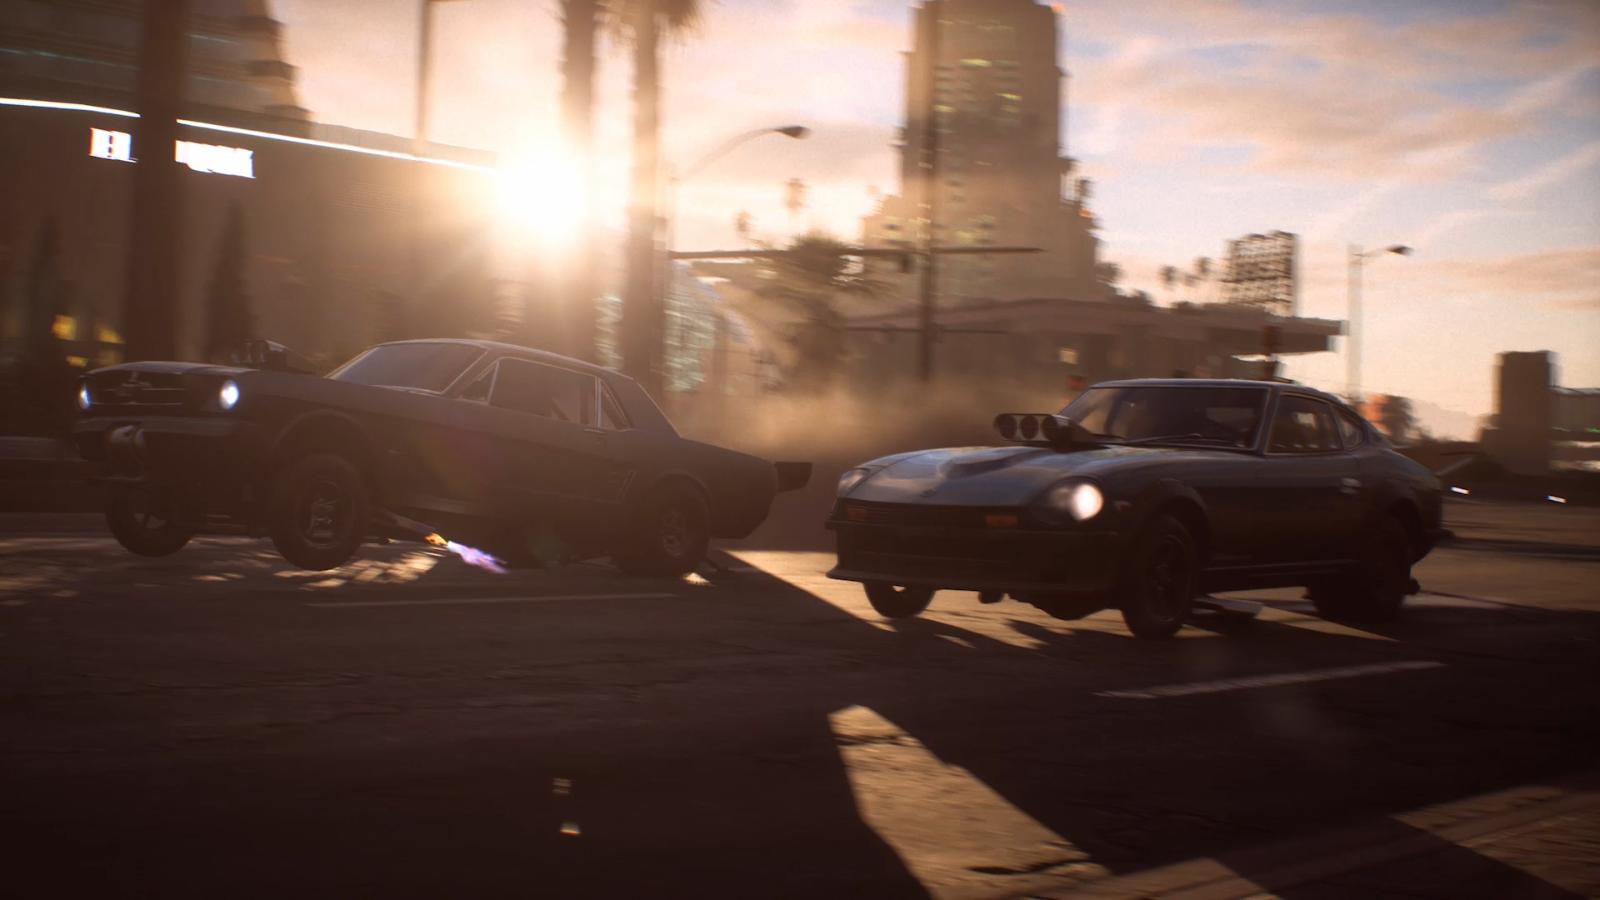 Review - Need for Speed: Payback - WayTooManyGames